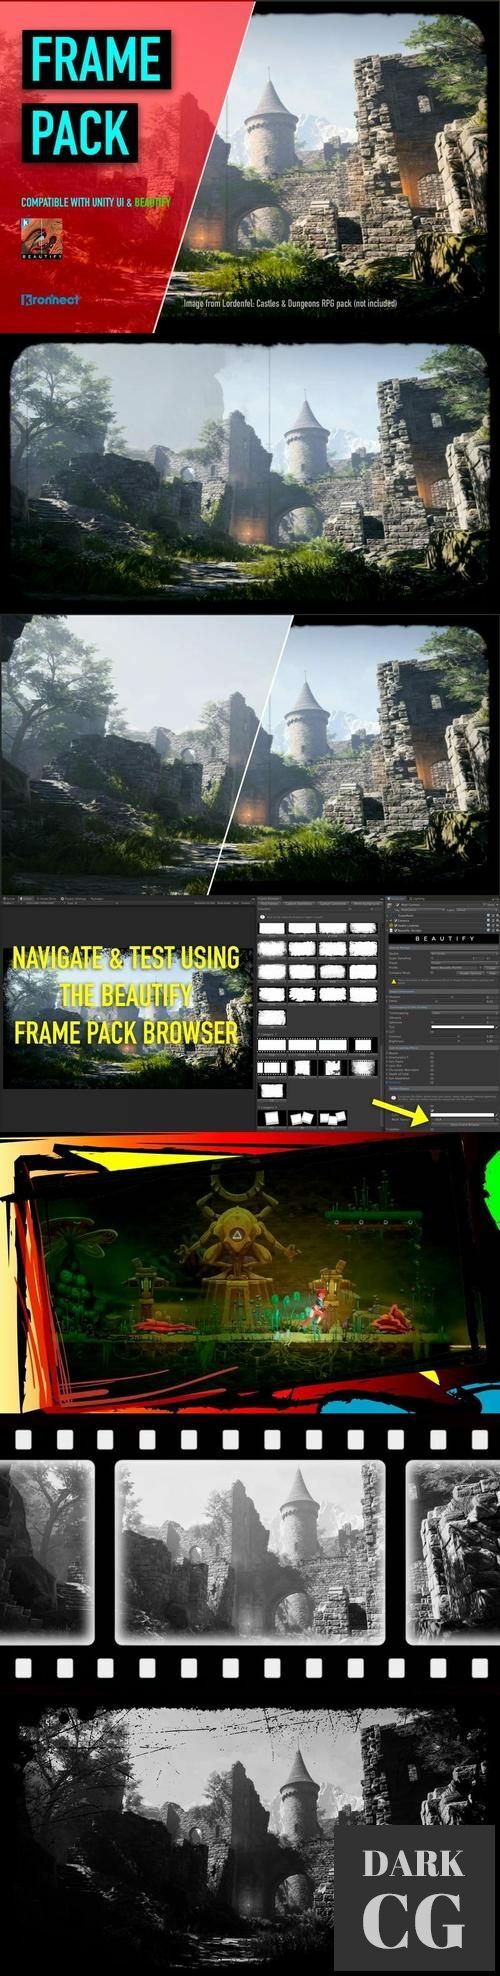 Unity Asset Store Frame Pack